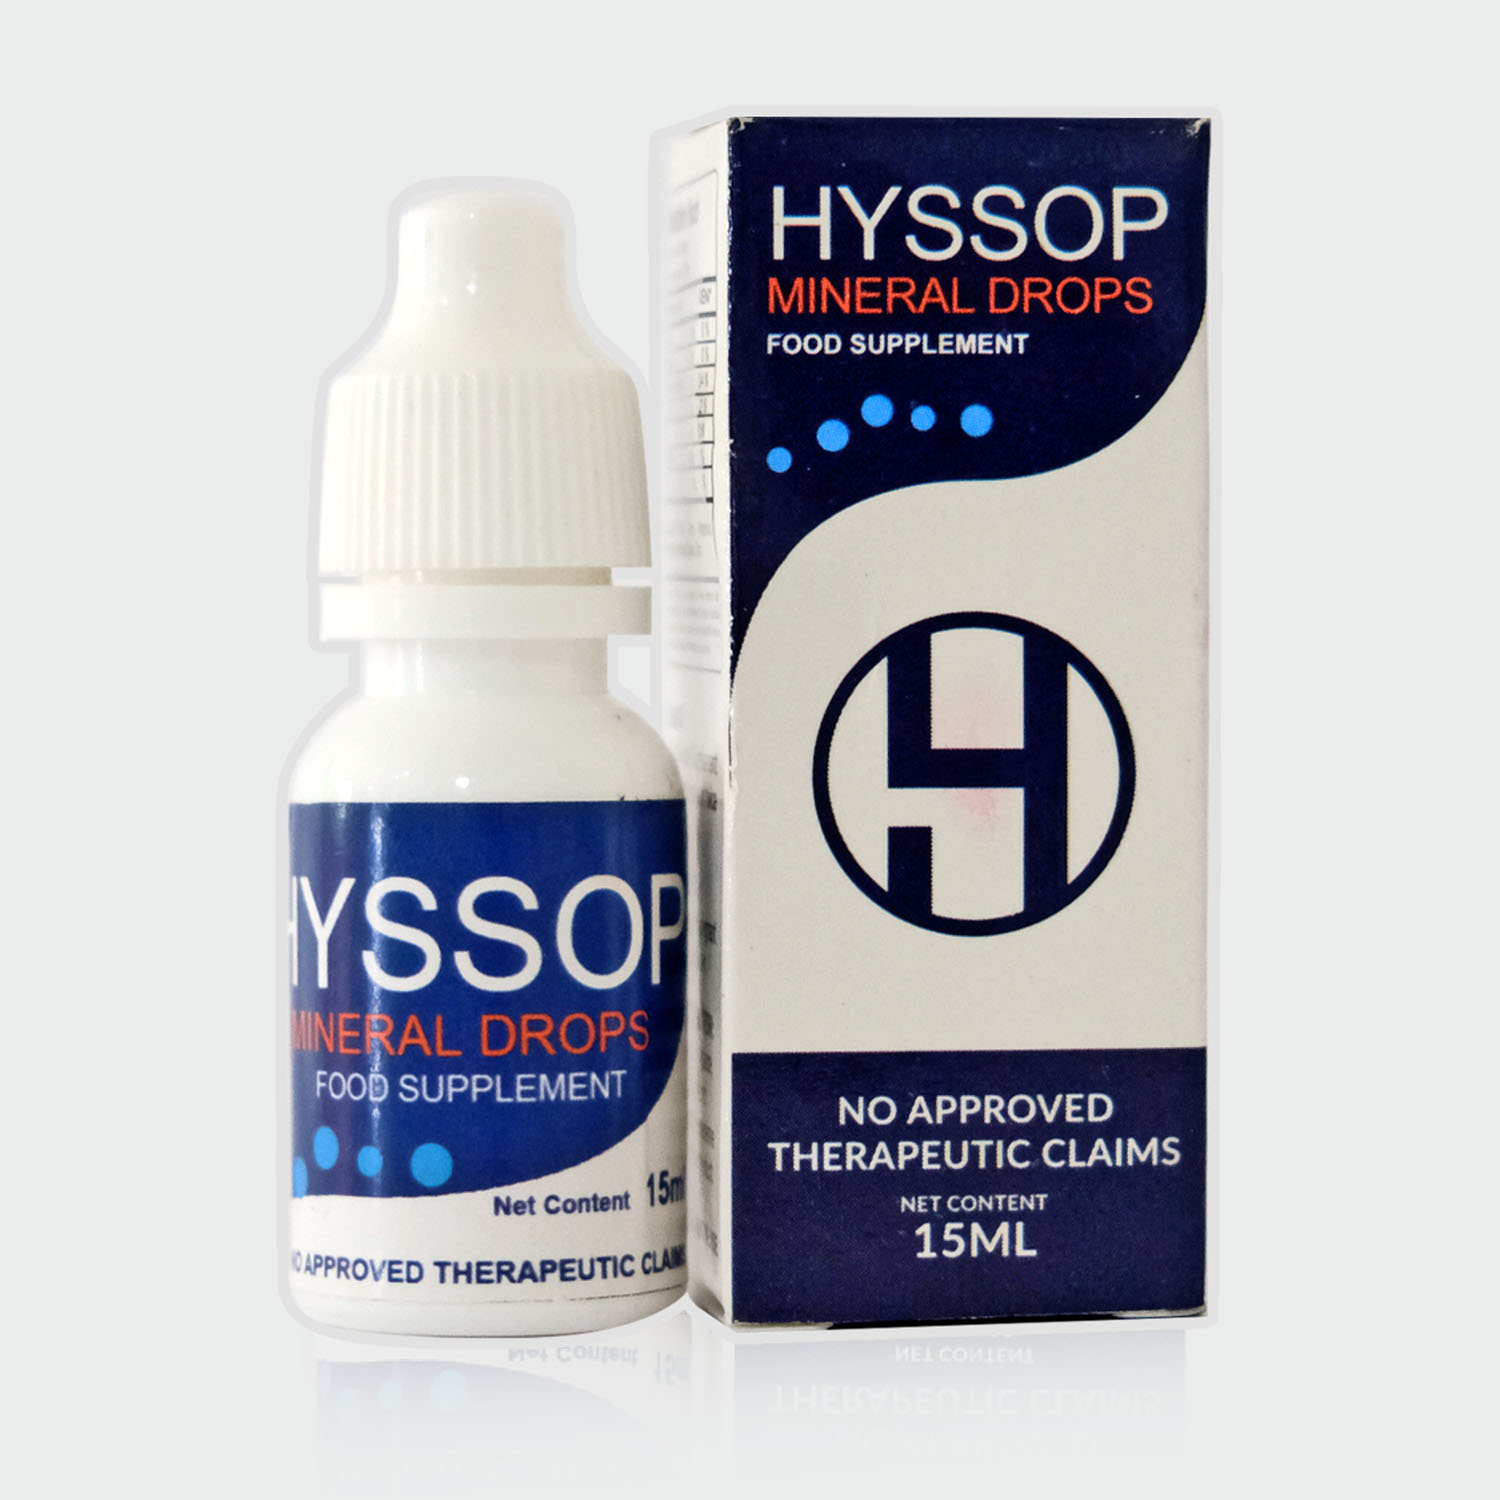 Phc03 A 1 Bottle Hyssop Mineral Eye Drop 15ml Each Dropper Cataract And